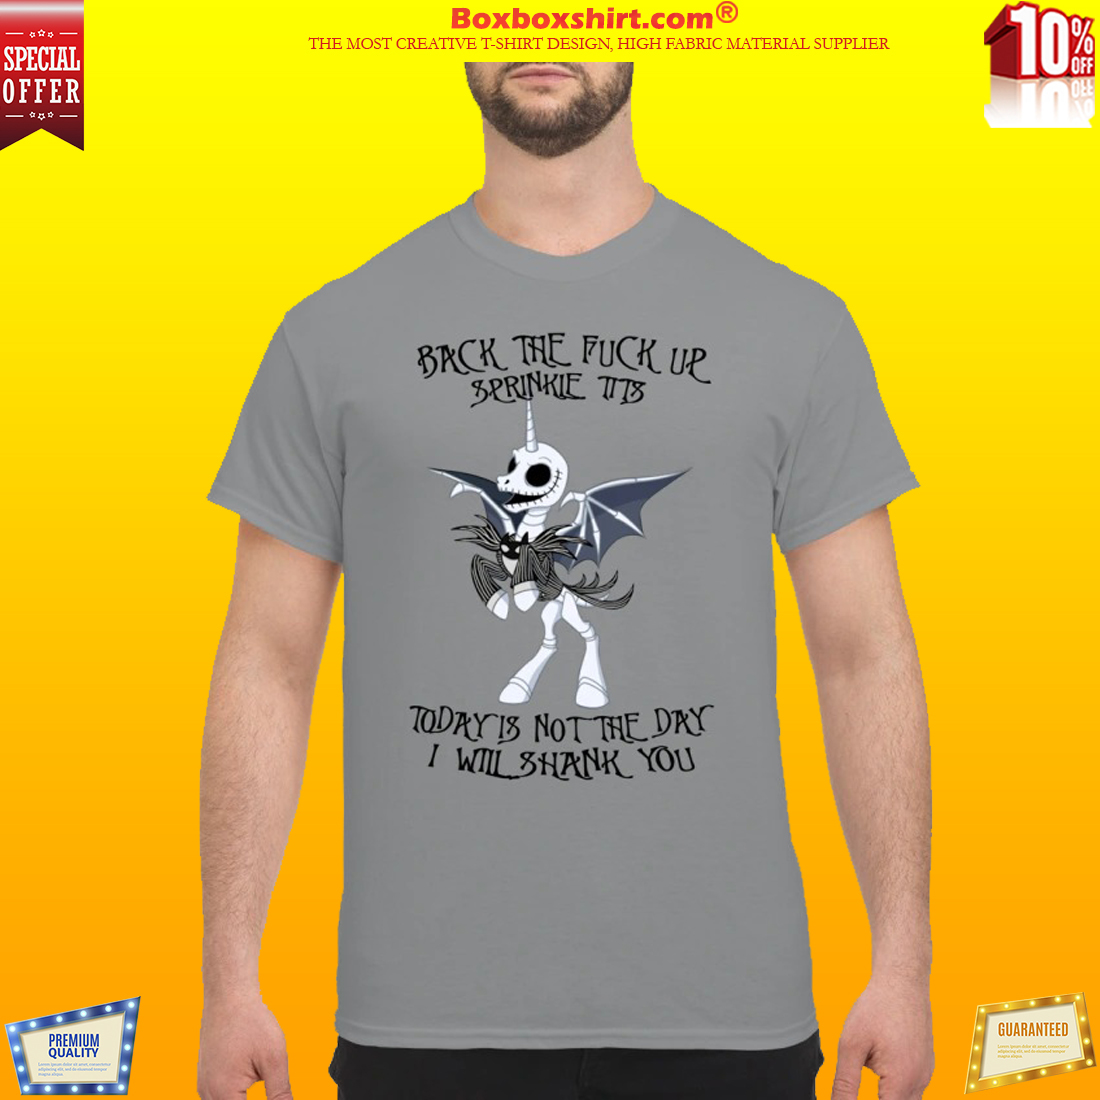 Jack Skellington Unicorn back the fuck up sprinkie tits today is not the day mug and shirt